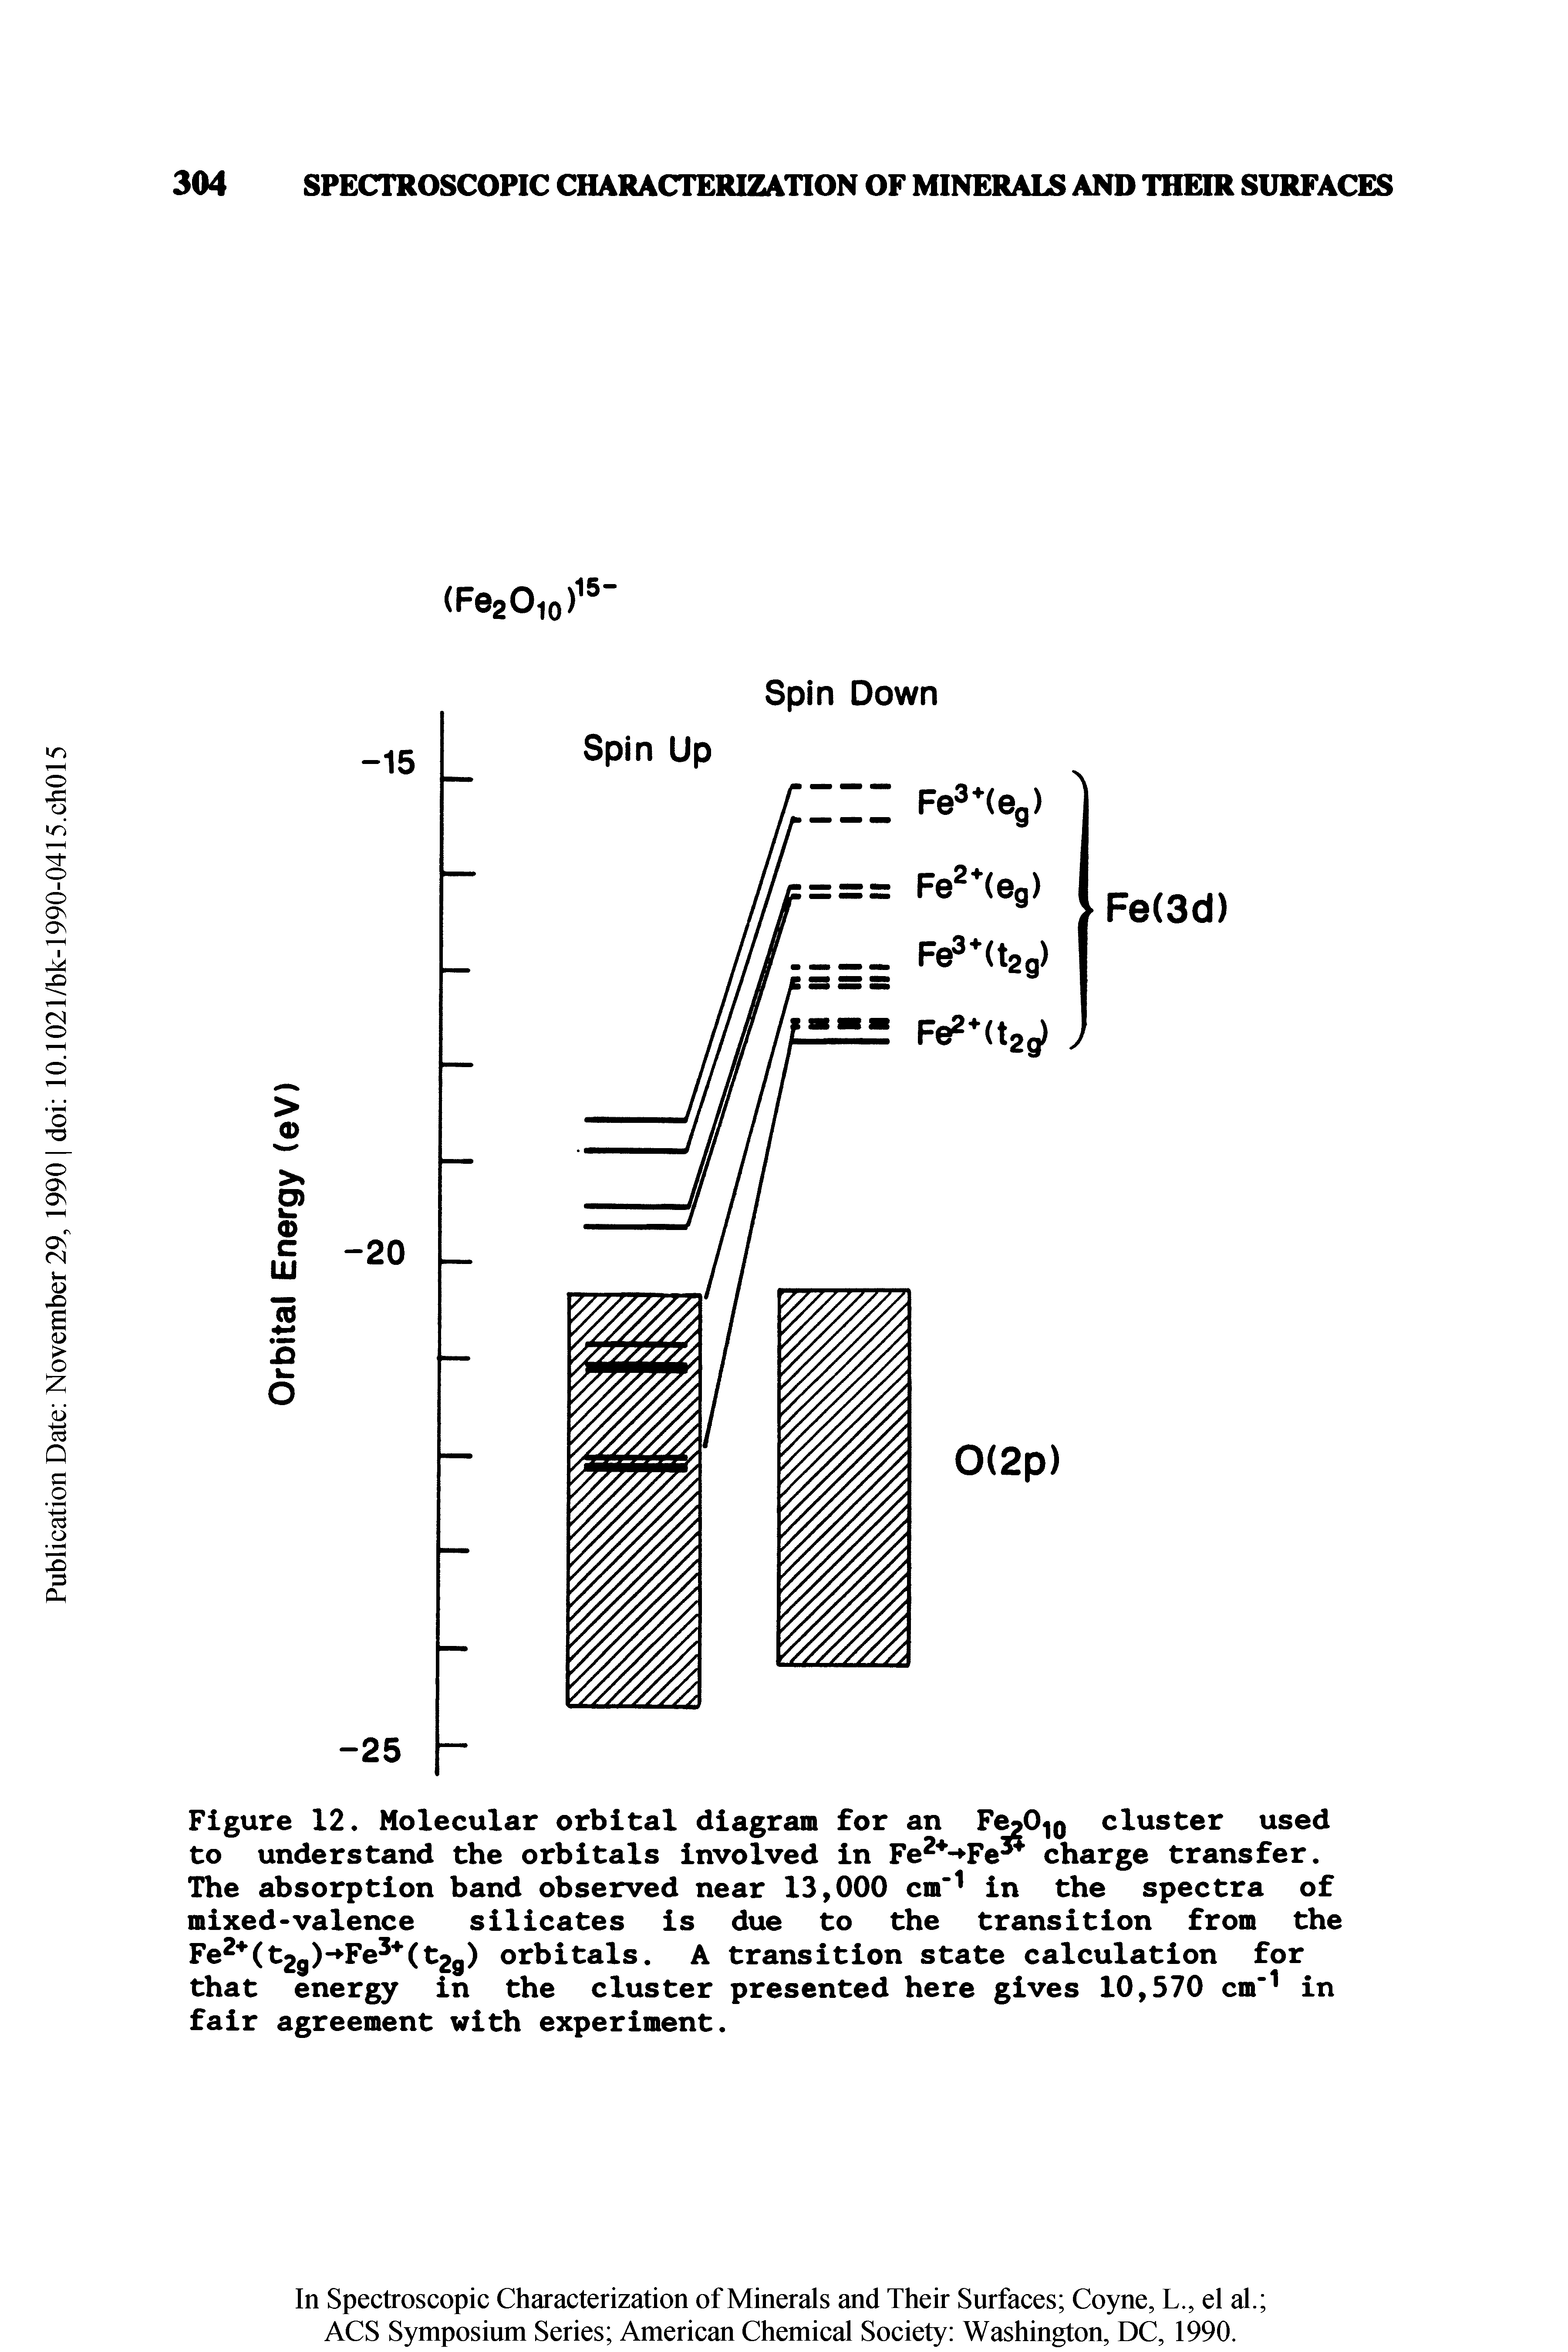 Figure 12. Molecular orbital diagram for an FegOjg cluster used to understand the orbitals involved in Fe Fe3 charge transfer. The absorption band observed near 13,000 cm 1 in the spectra of mixed-valence silicates is due to the transition from the Fe2 (t2g)- Fe3+(t2g) orbitals. A transition state calculation for that energy in the cluster presented here gives 10,570 cm"1 in fair agreement with experiment.